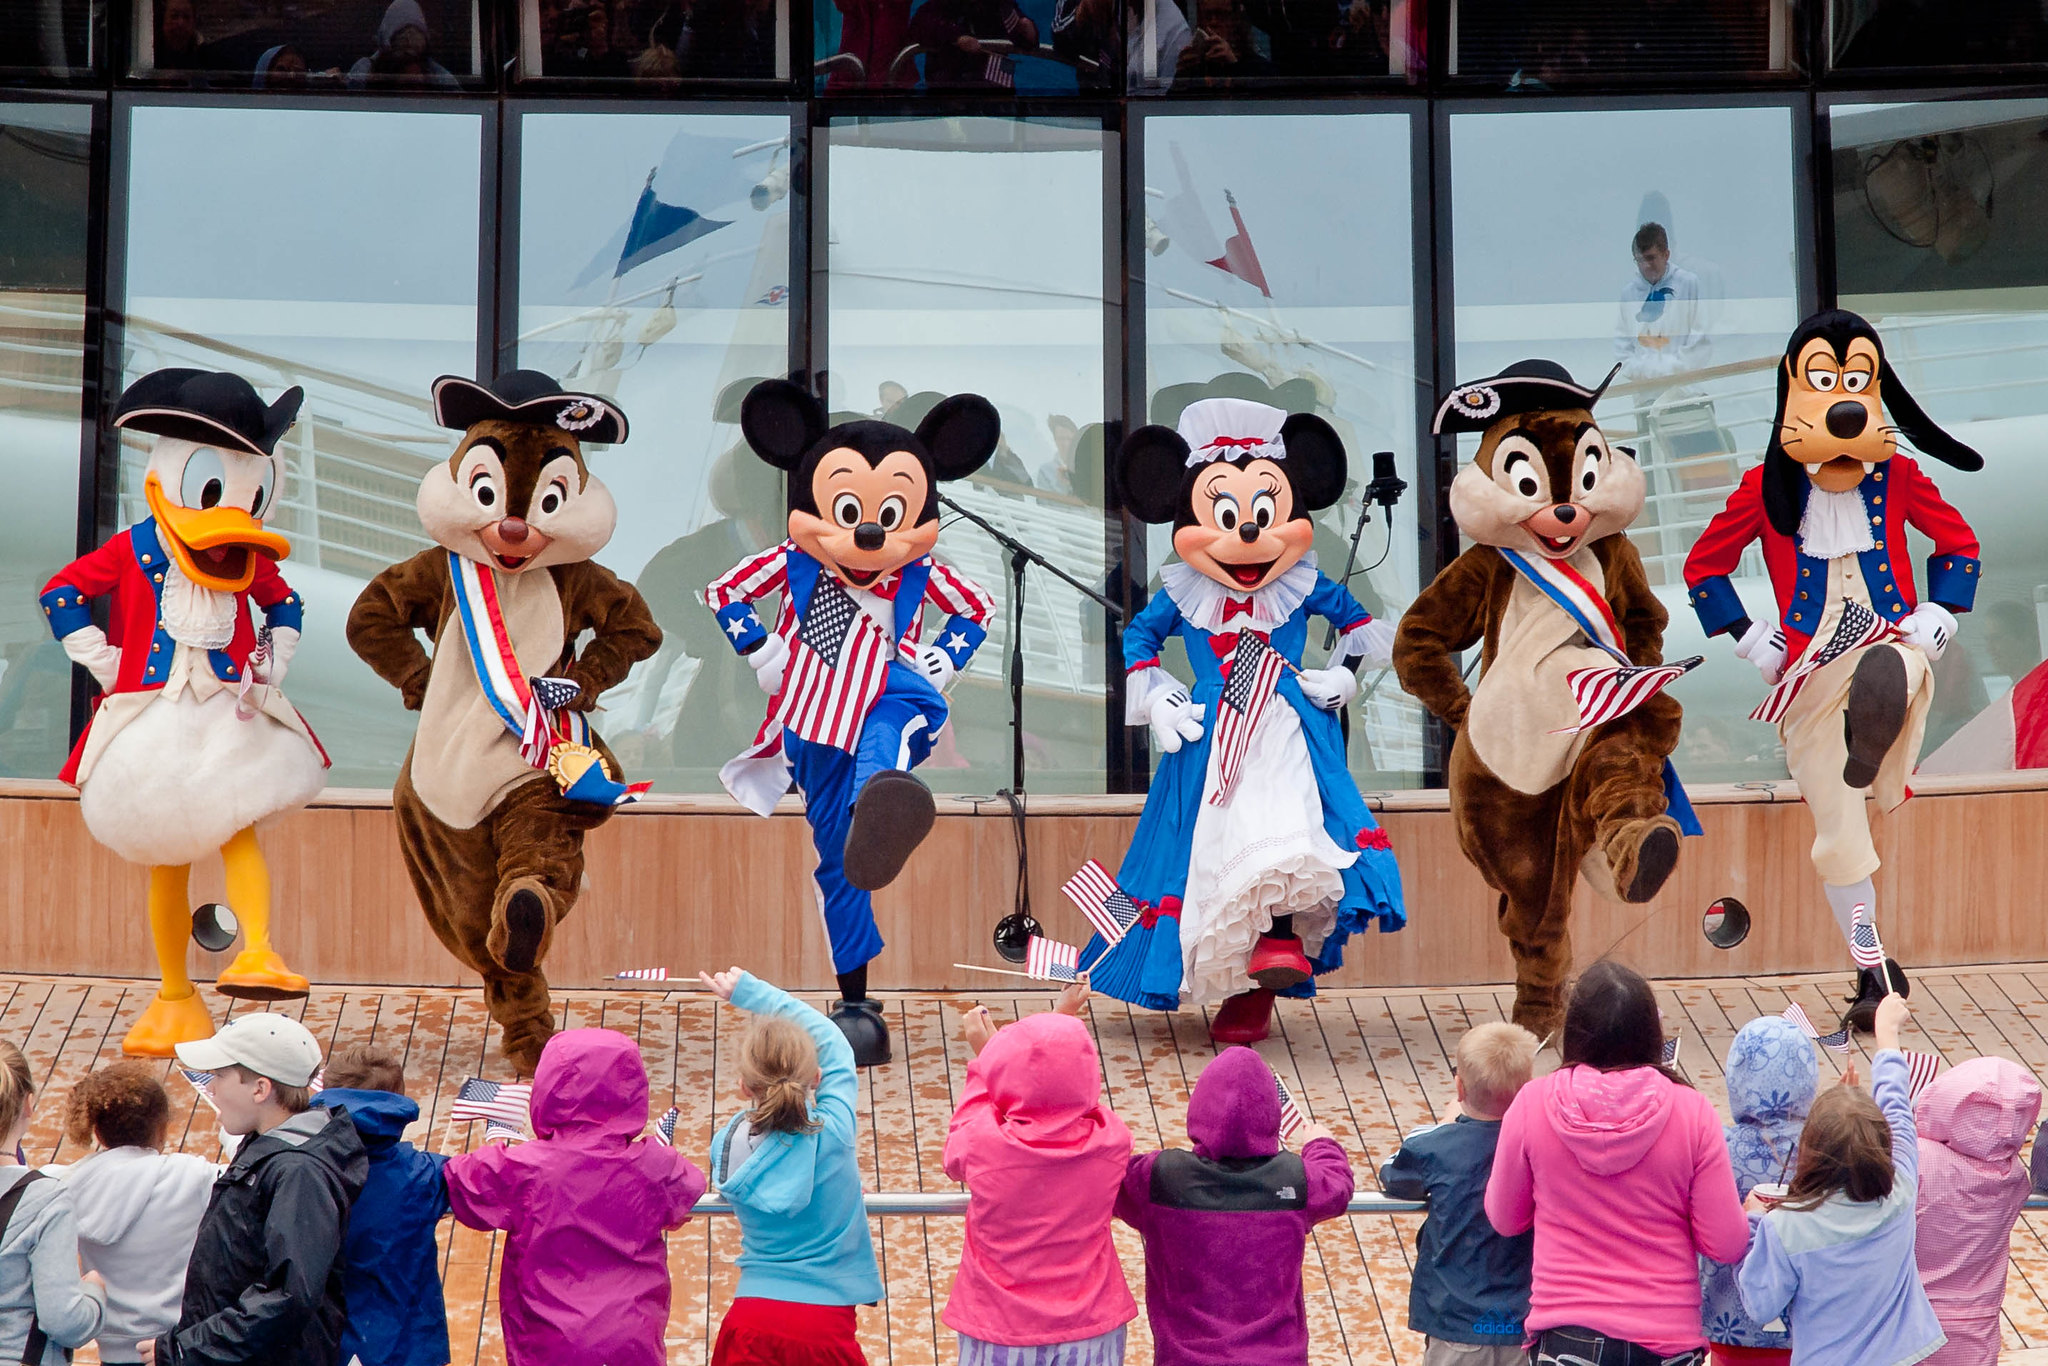 People dressed in classic Disney character costumes perform for a crowd of children.